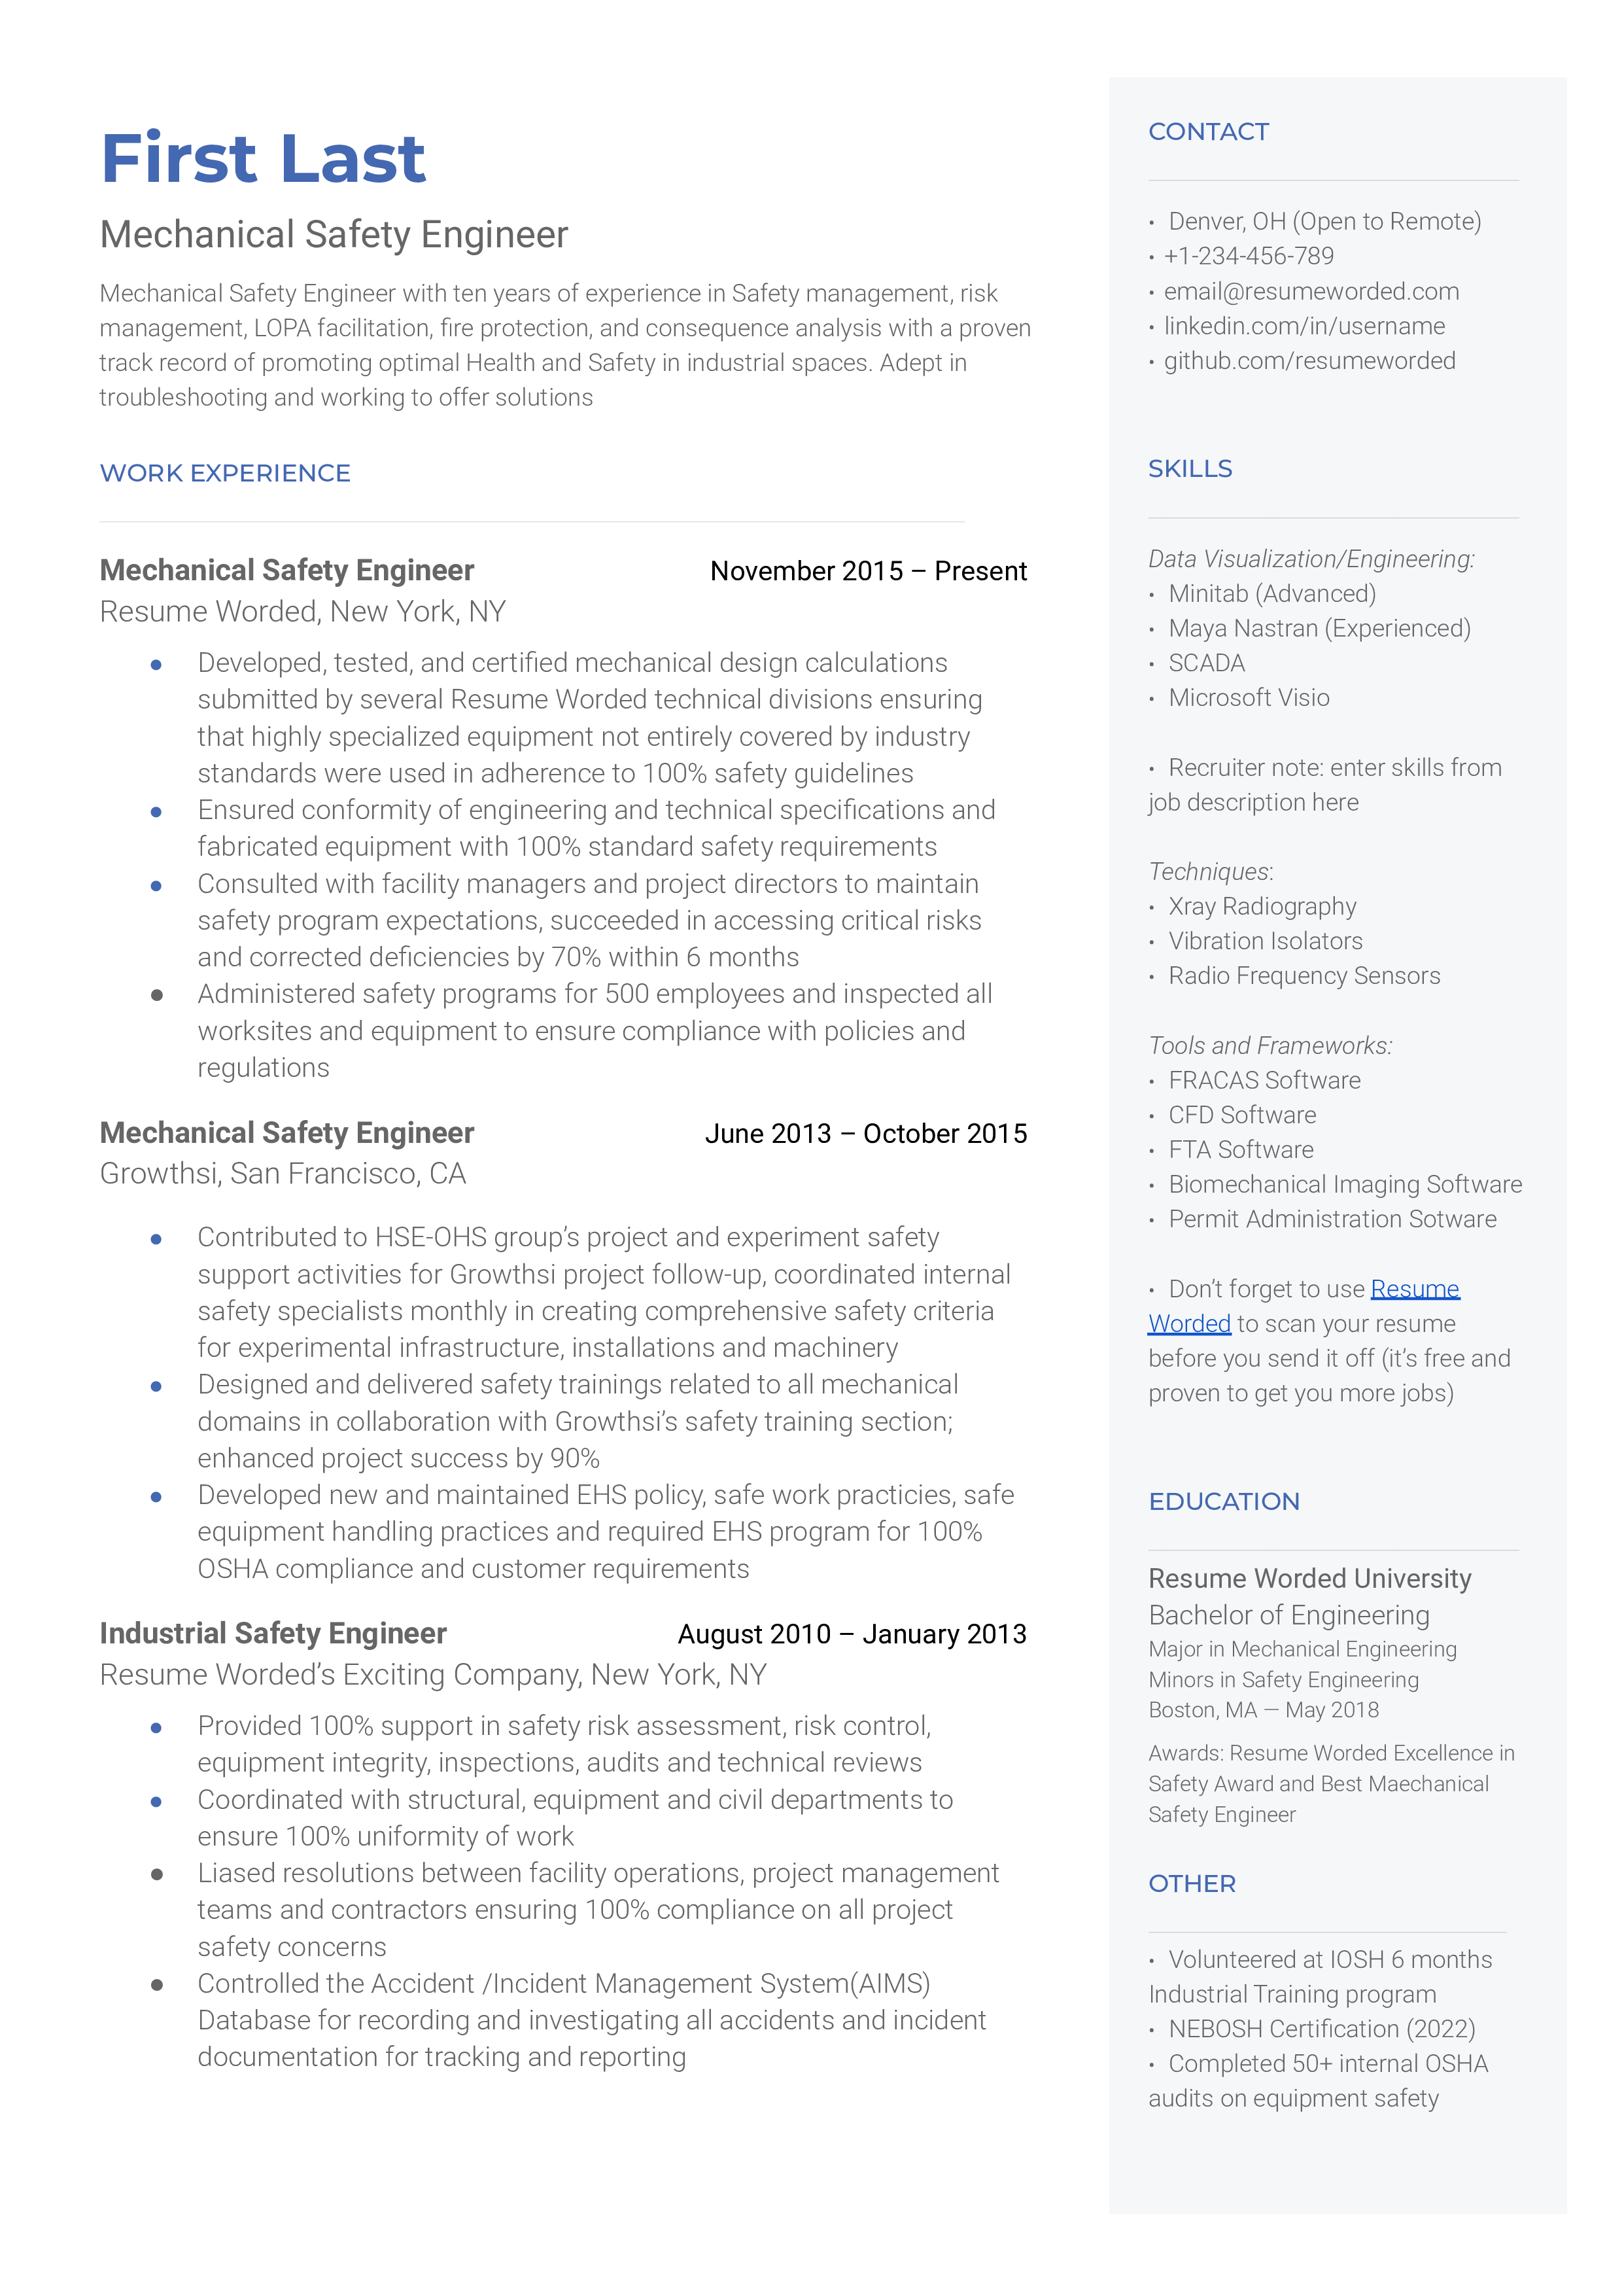 A mechanical safety engineer resume template that uses strong action verbs